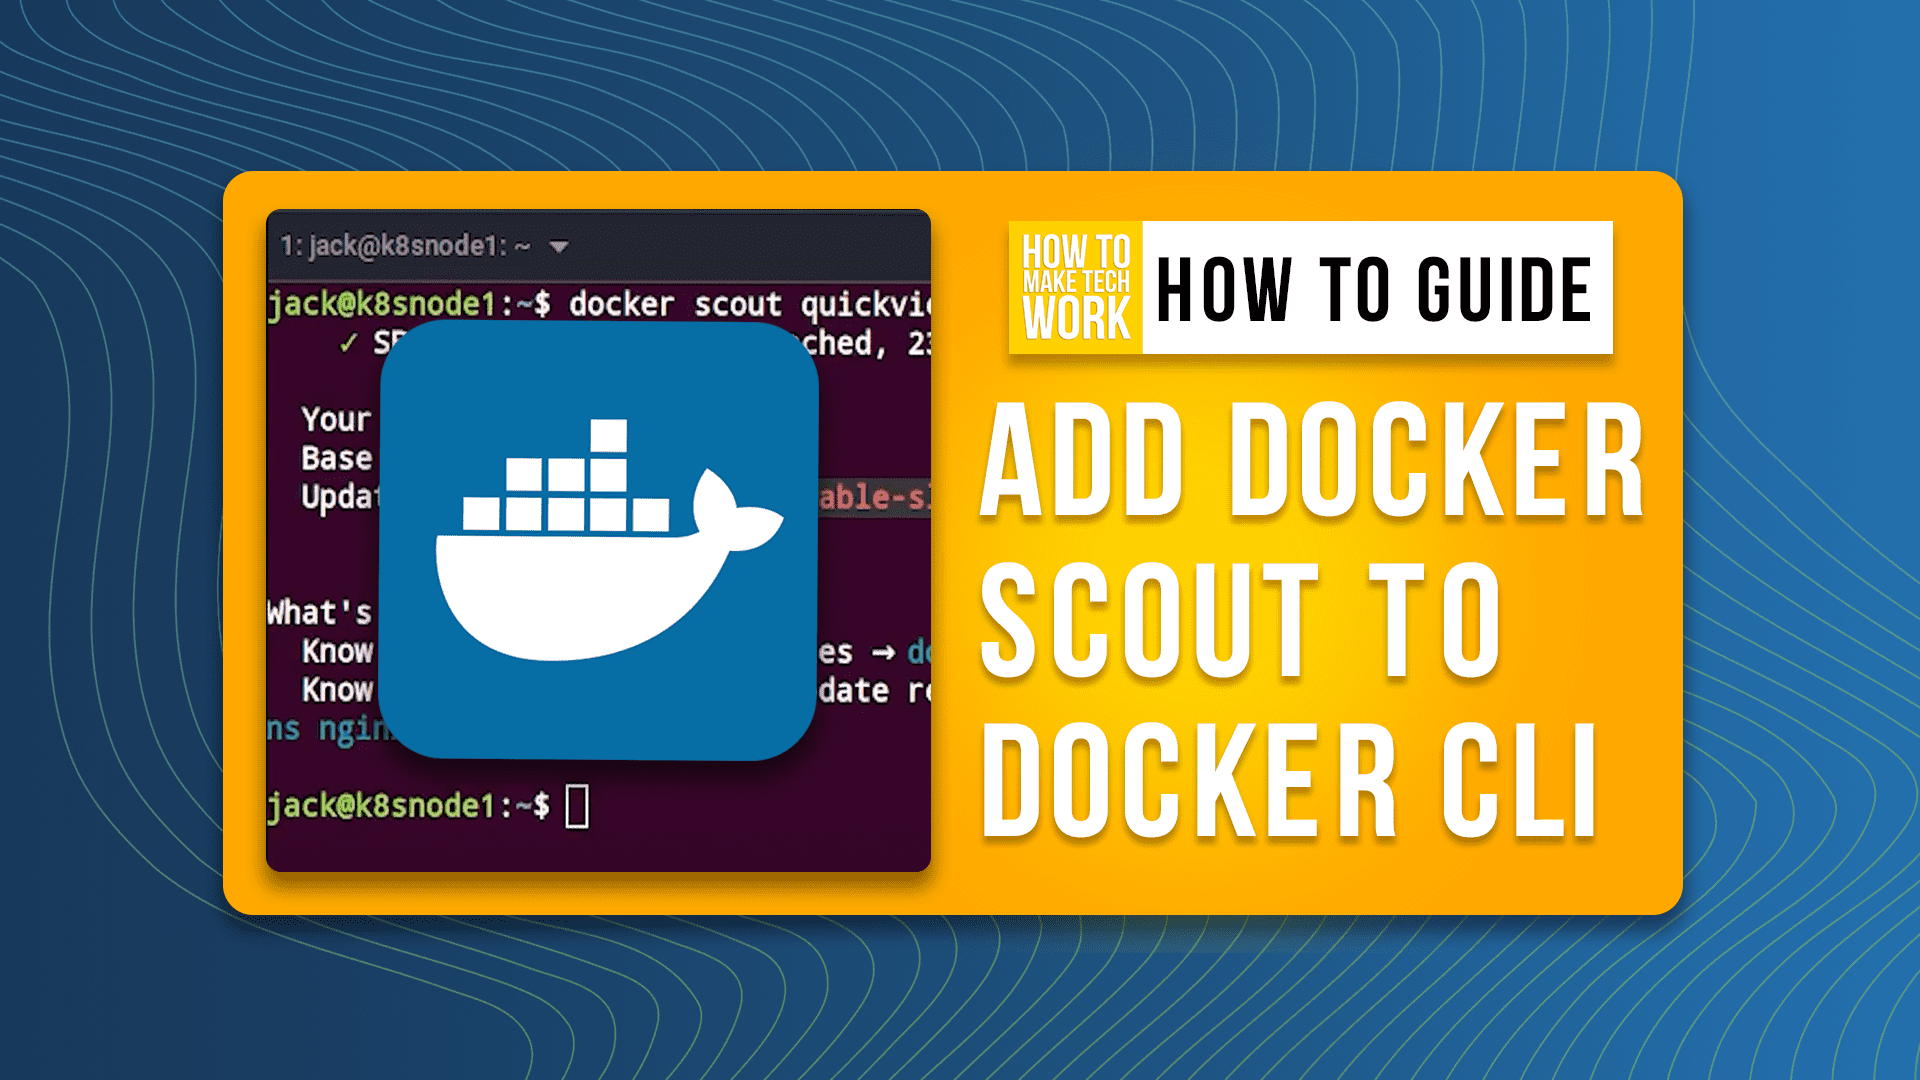 How to add the Docker Scout feature to the Docker CLI – Source: www.techrepublic.com